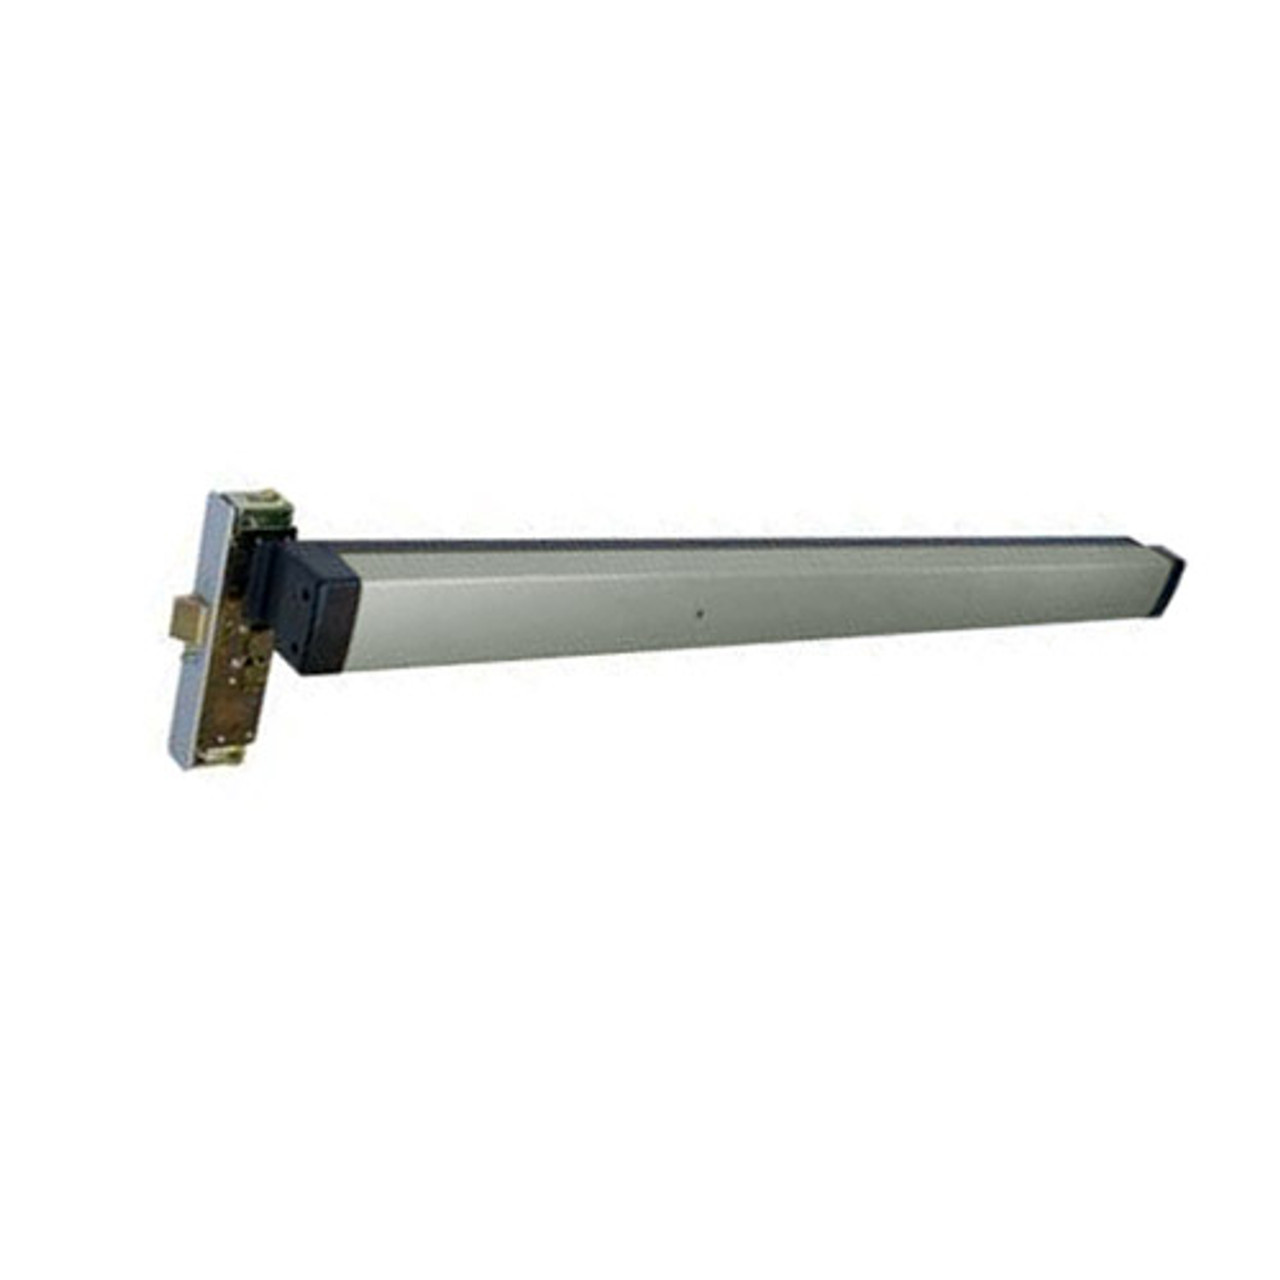 3300-80-36-US32 Adams Rite Mortise Exit Device